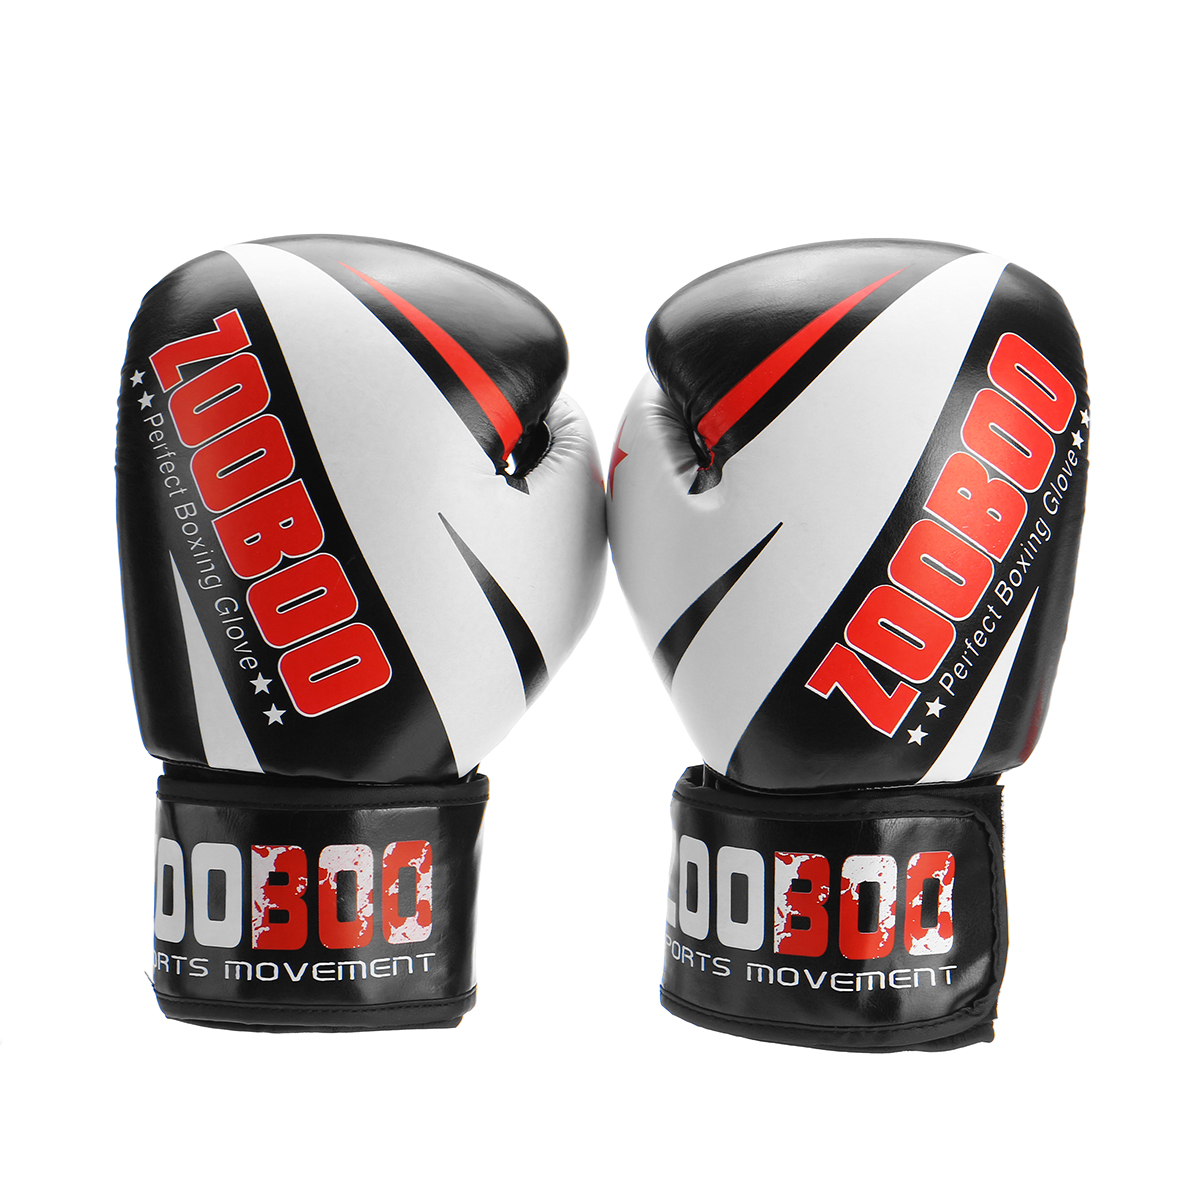 1-Pair-Adult-Boxing-Gloves-Professional-Mesh-Breathable-PU-Leather-Gloves-Sanda-Boxing-Training-Acce-1676767-7